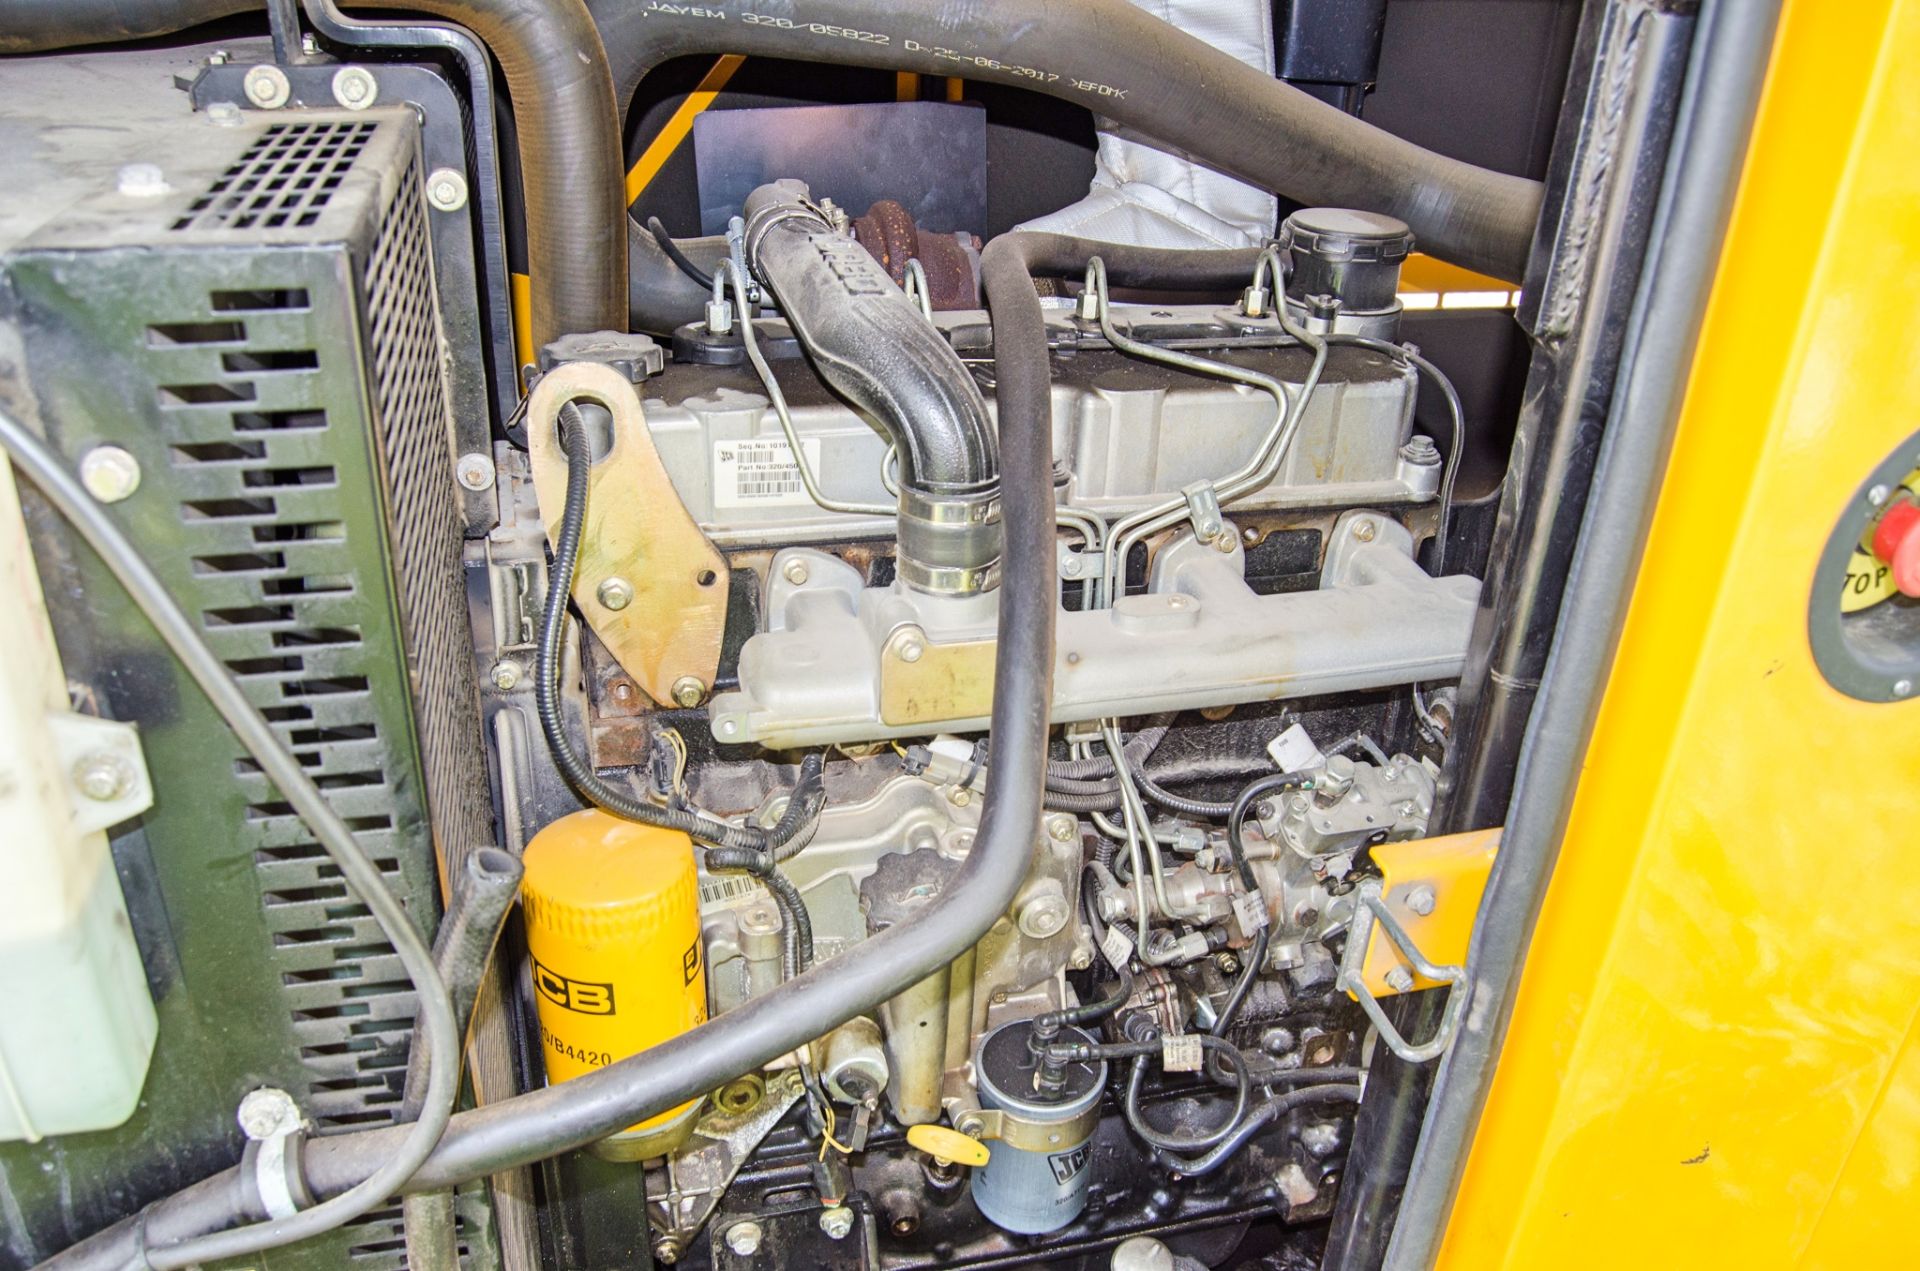 JCB 66QS 60 kva diesel driven generator Year: 2017 S/N: 2292241 Recorded hours: 12285 YG777 - Image 3 of 7